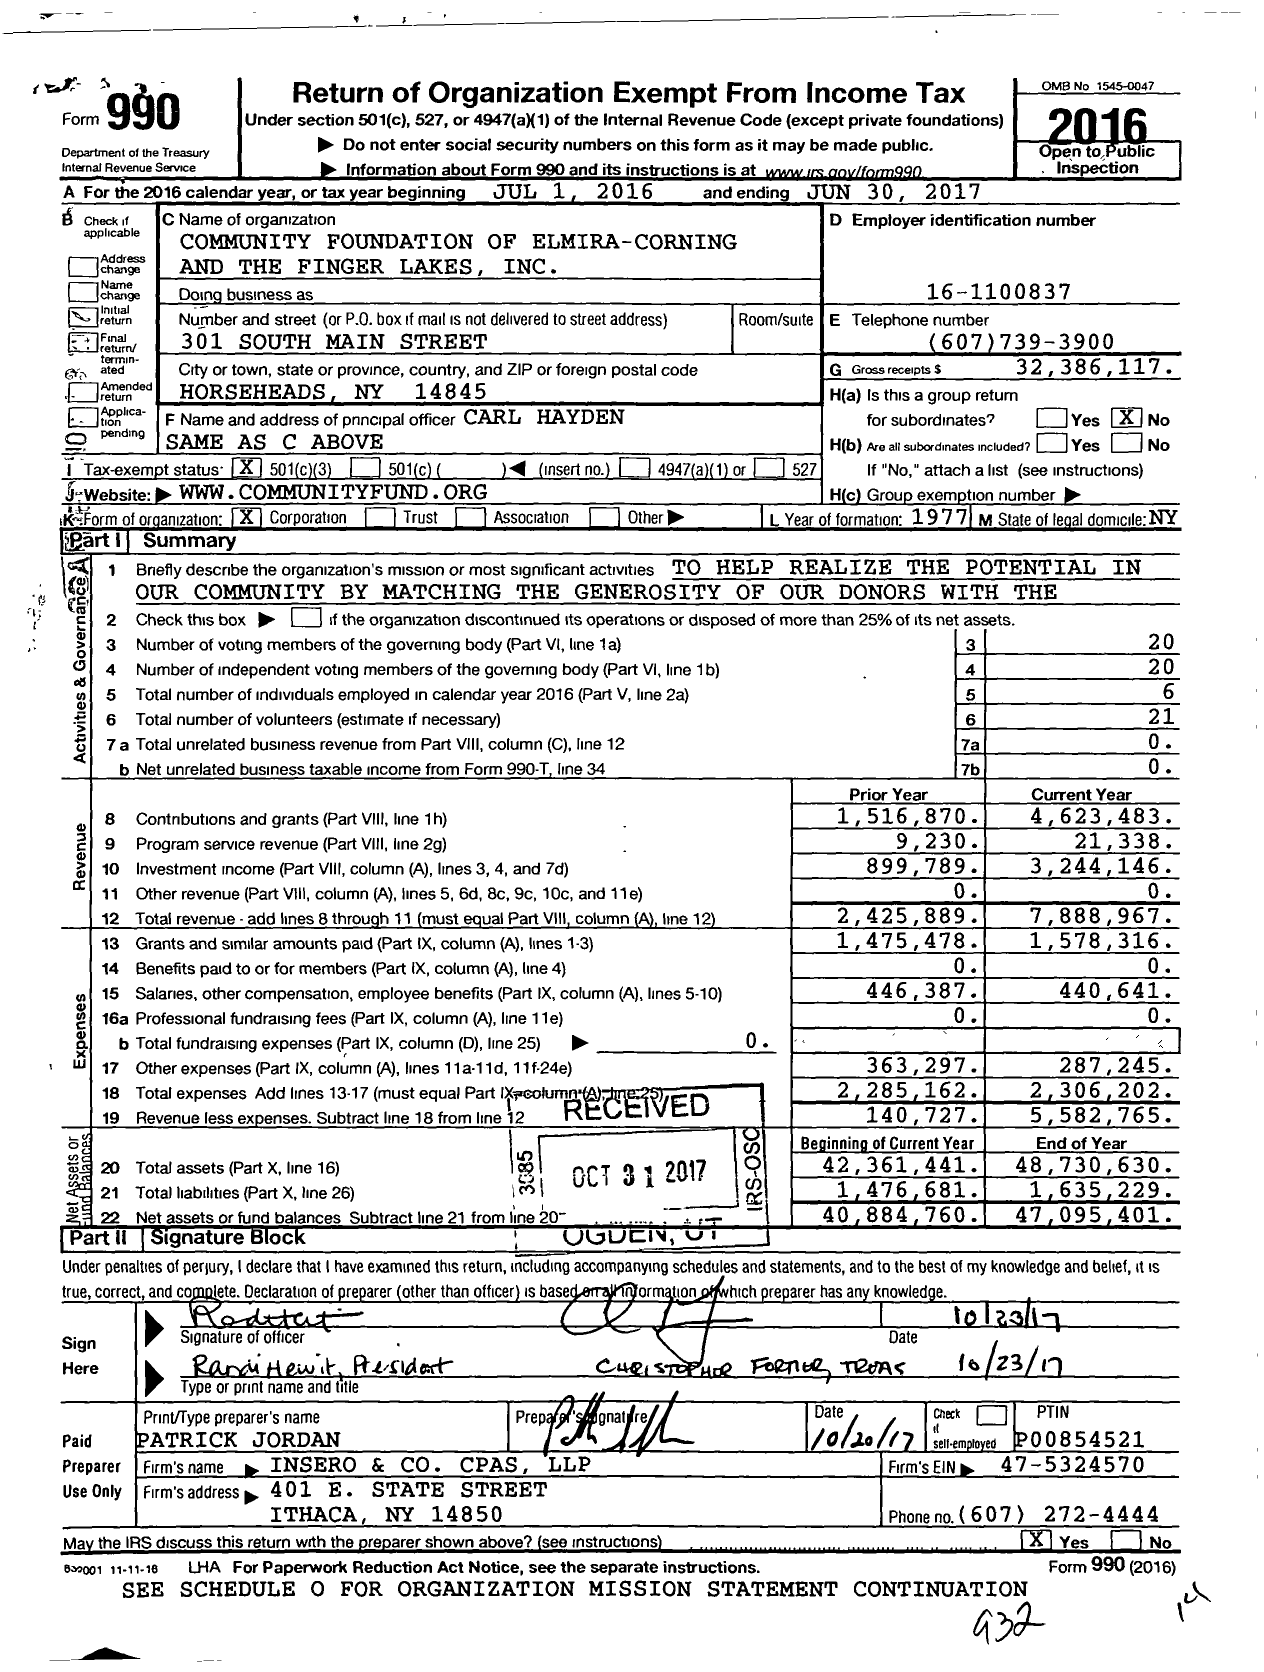 Image of first page of 2016 Form 990 for Community Foundation of Elmira-Corning and the Finger Lakes